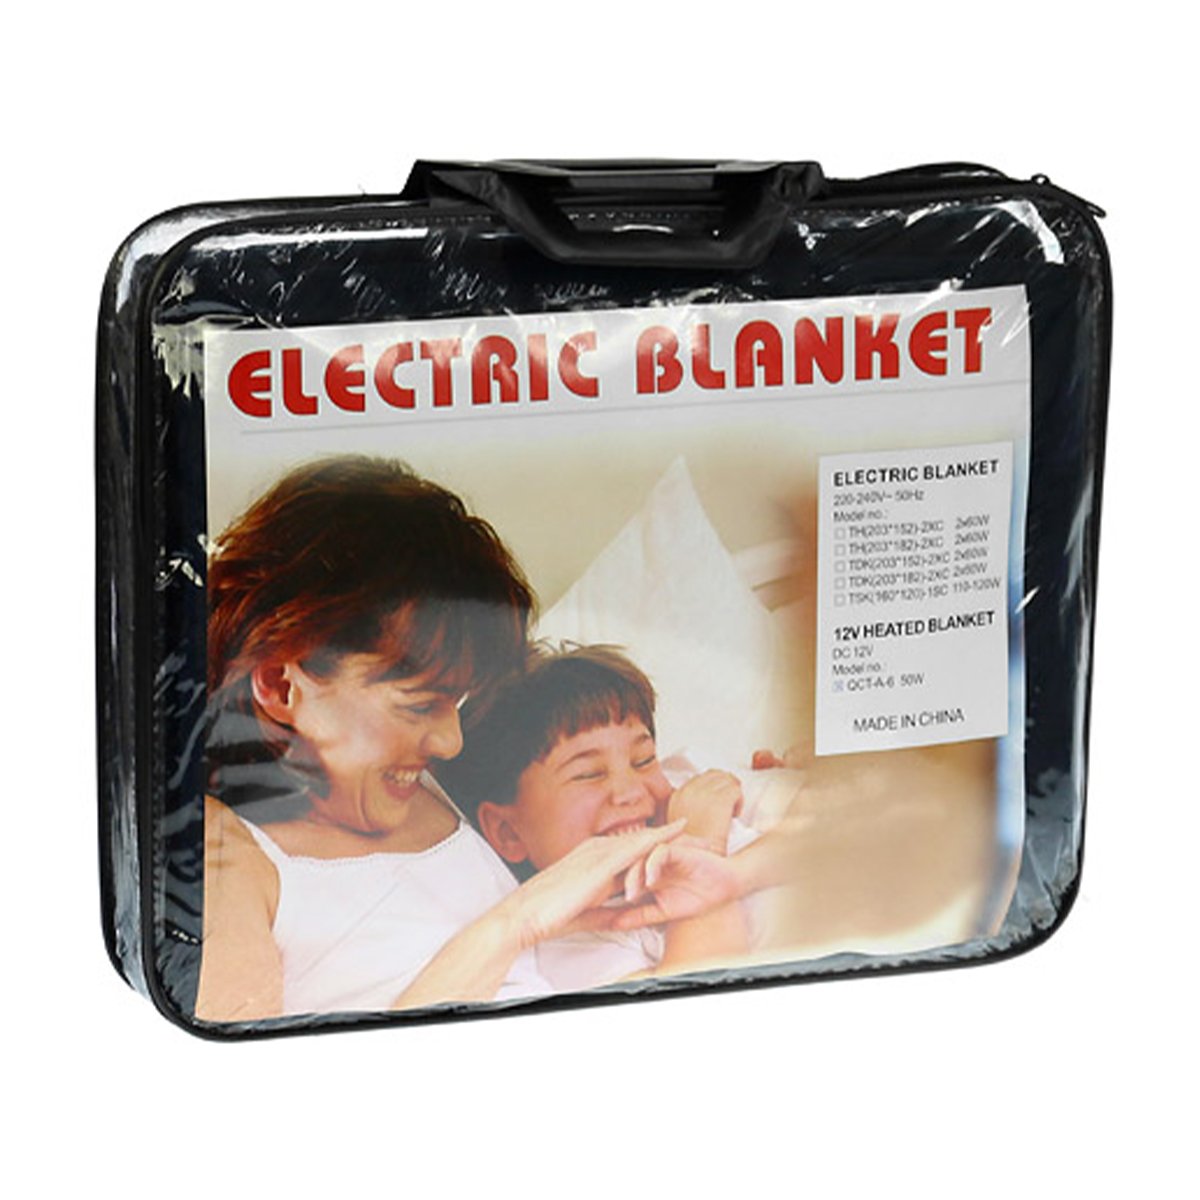 Laura Hill Heated Electric Car Blanket 150x110cm 12v - Black from Deals499 at Deals499